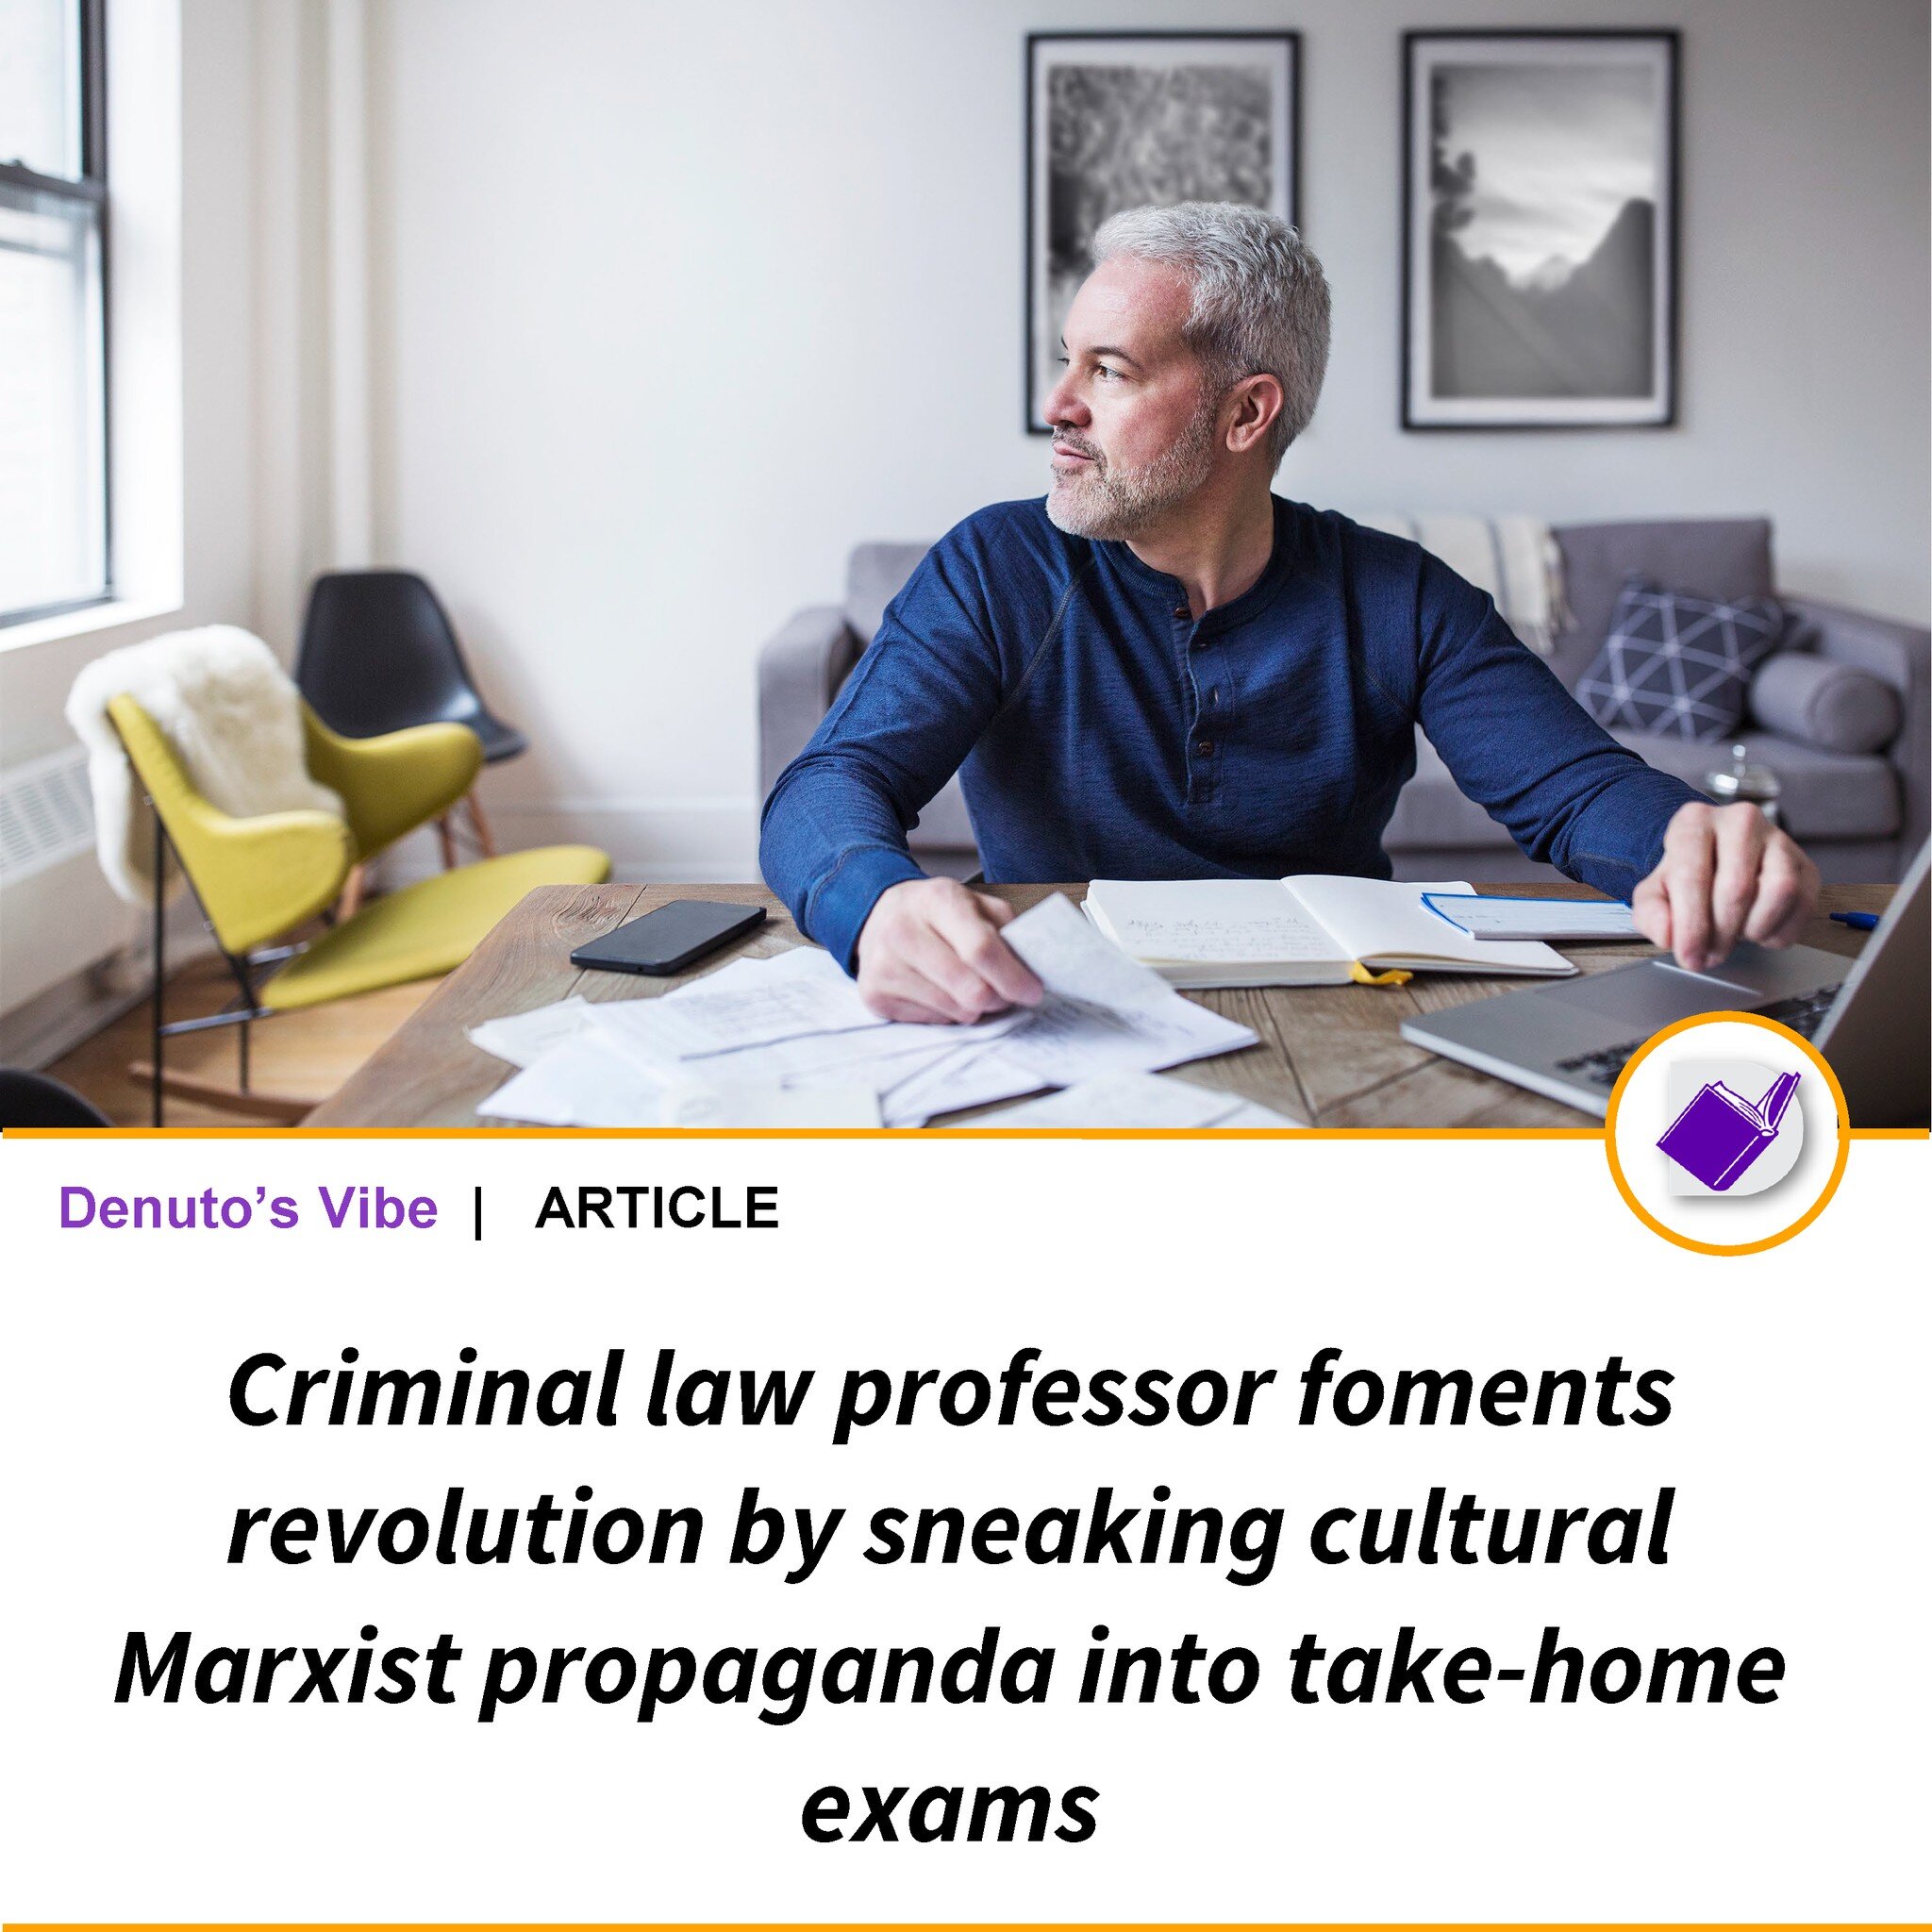 New article!

Time to find out what this particular law professor is hiding in their exams...

https://www.thelegalforecast.com/criminal-law-professor-foments-revolution-by-sneaking-cultural-marxist-propaganda-into-take-home-exams